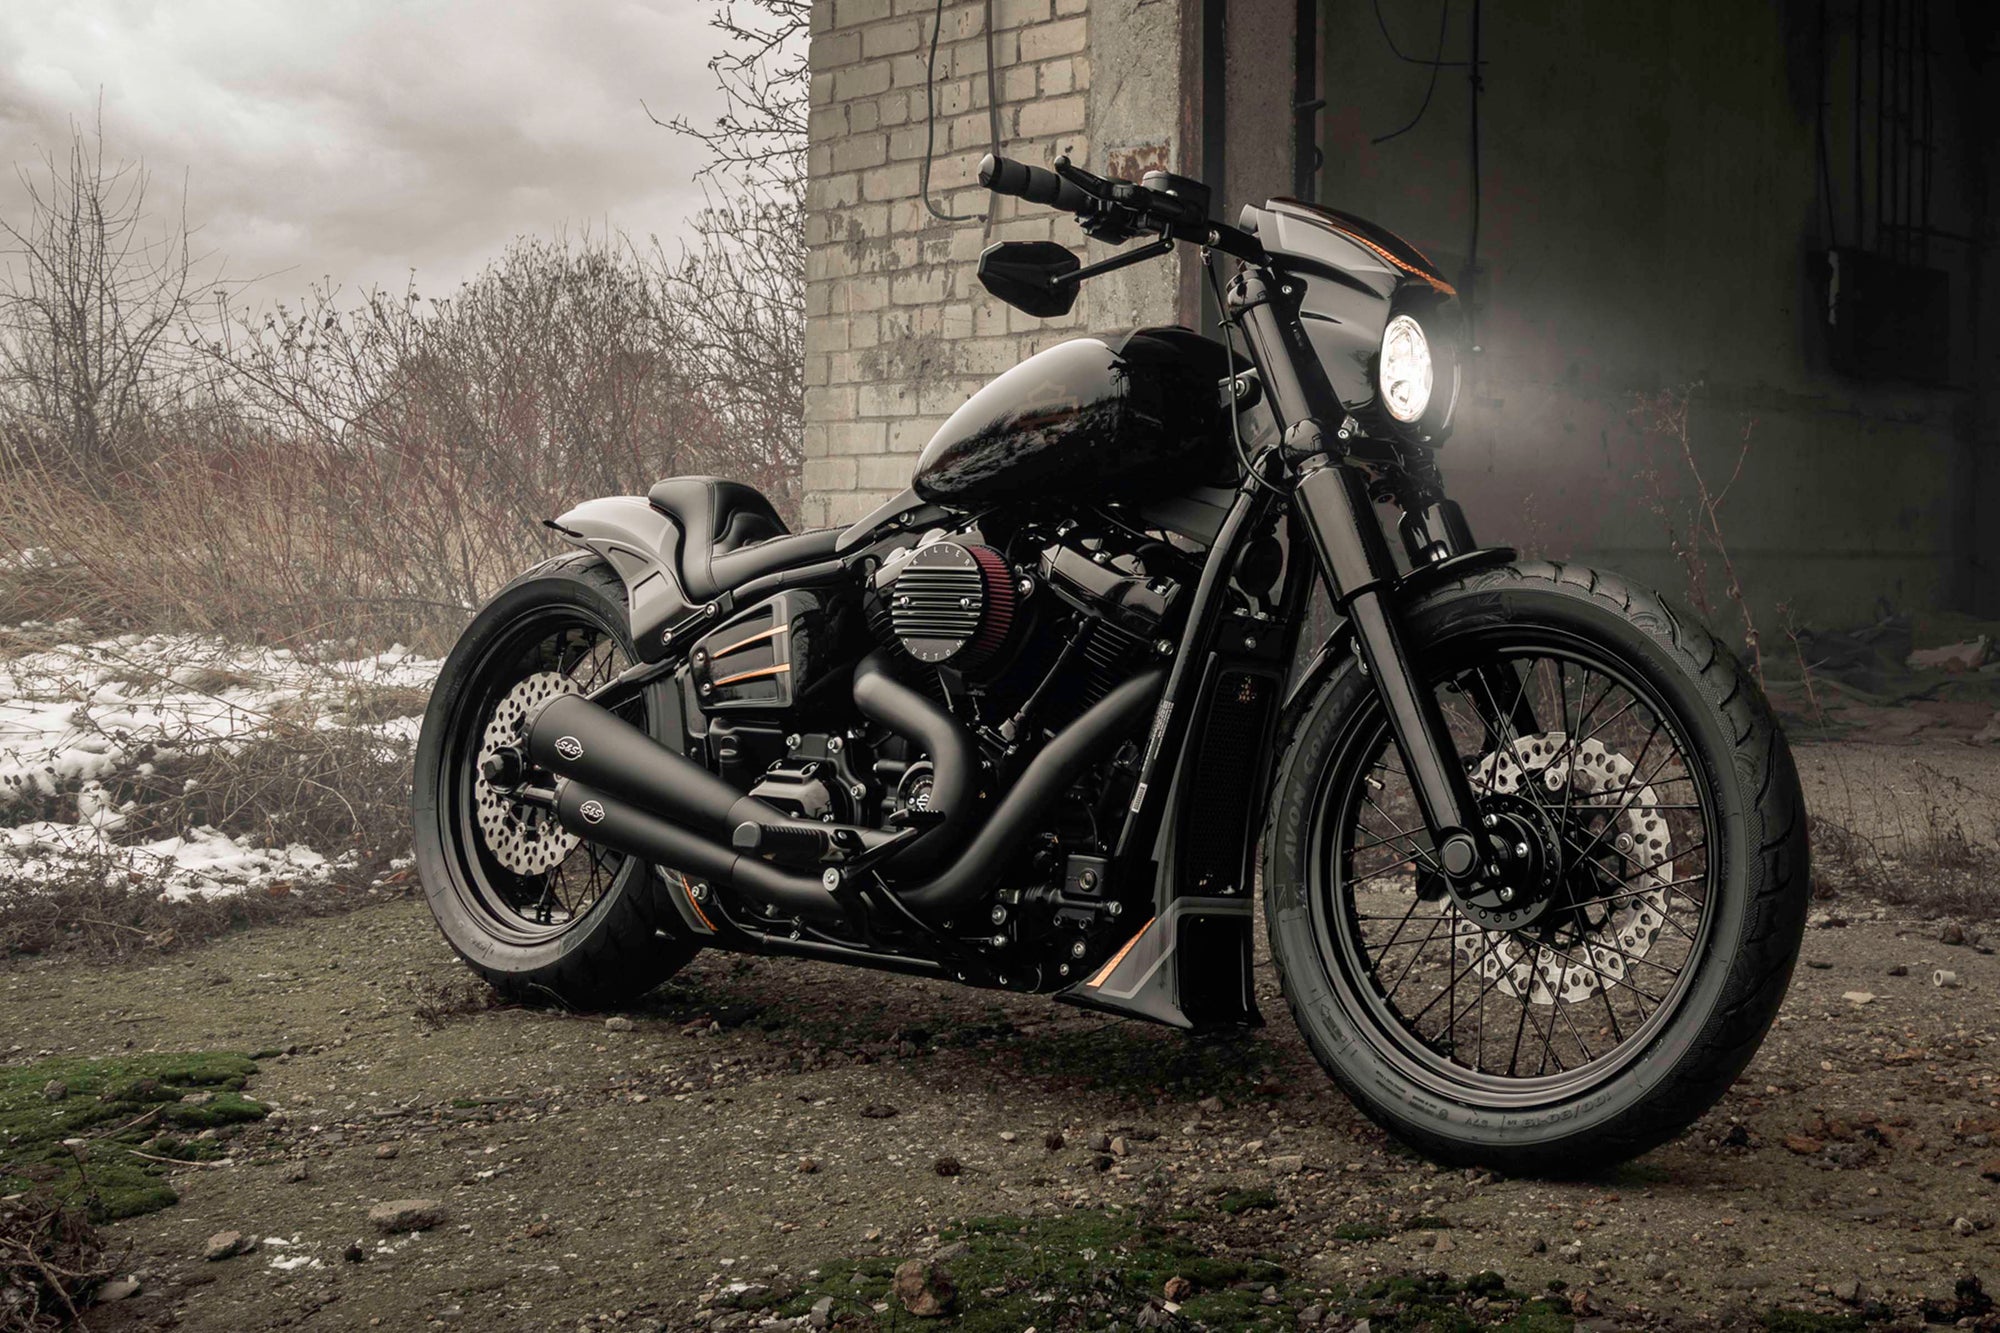 Harley Davidson motorcycle with Killer Custom parts from the side outside in an abandoned environment with some snow in the background